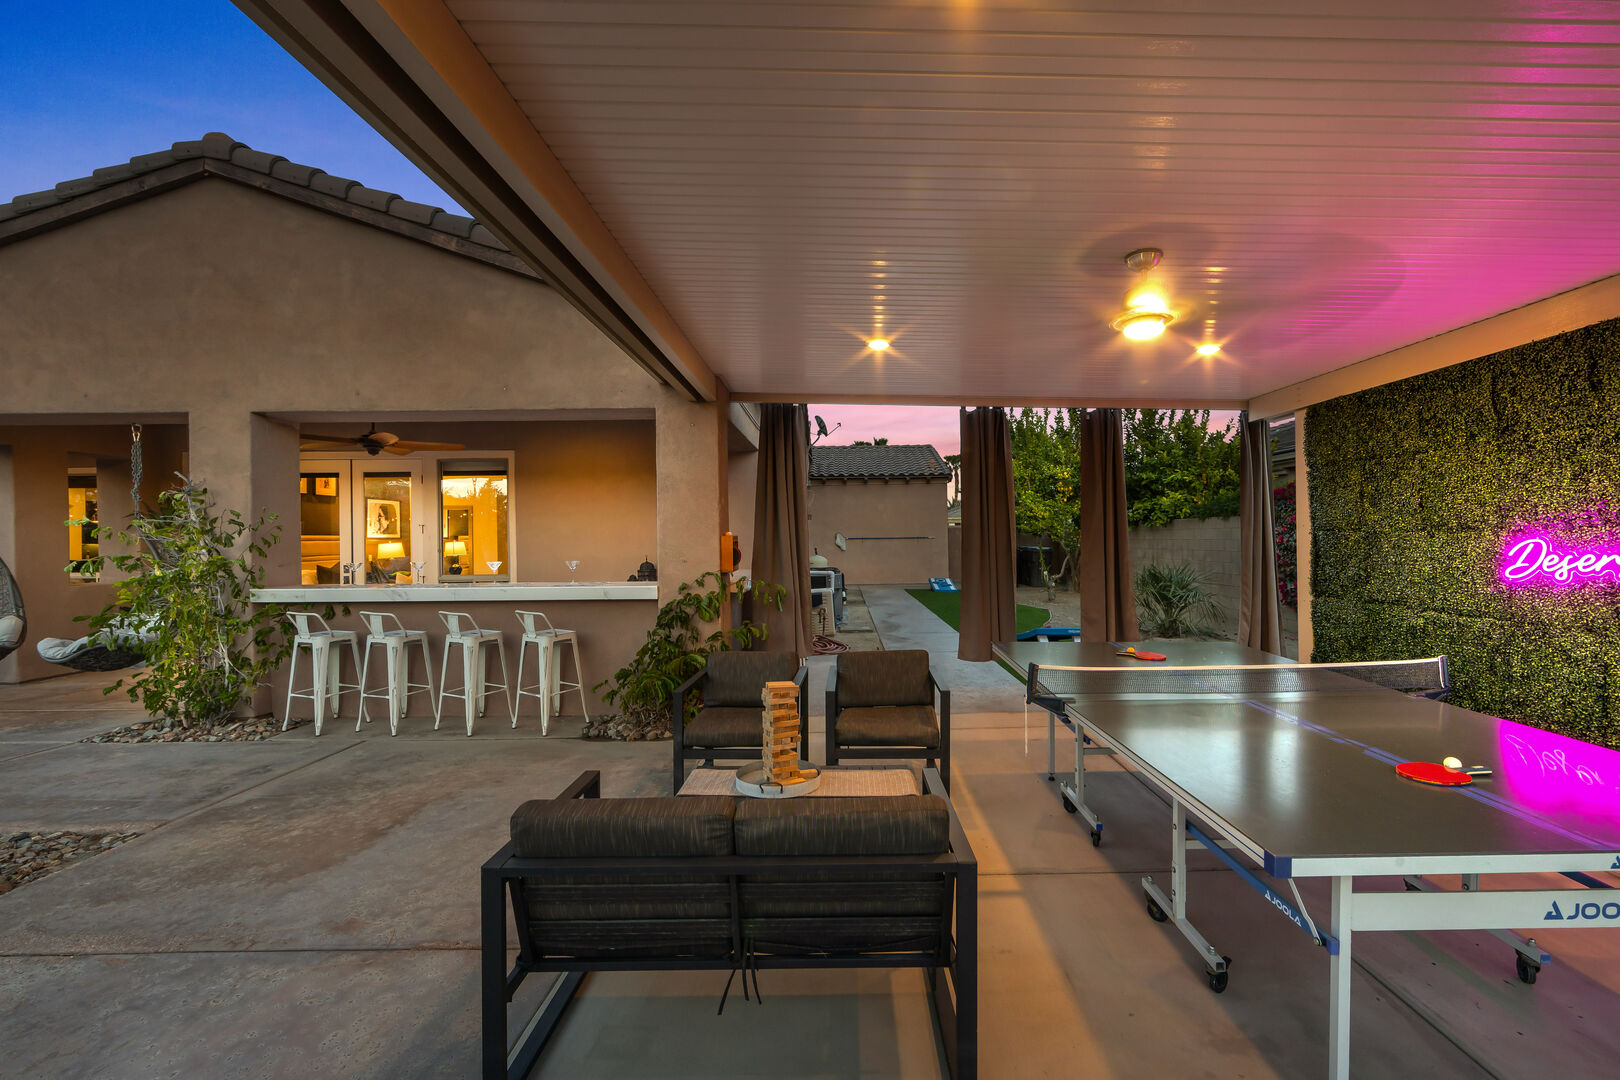 A ping pong table with lighting is available for evening enjoyment. The shaded outdoor space includes additional seating for four!